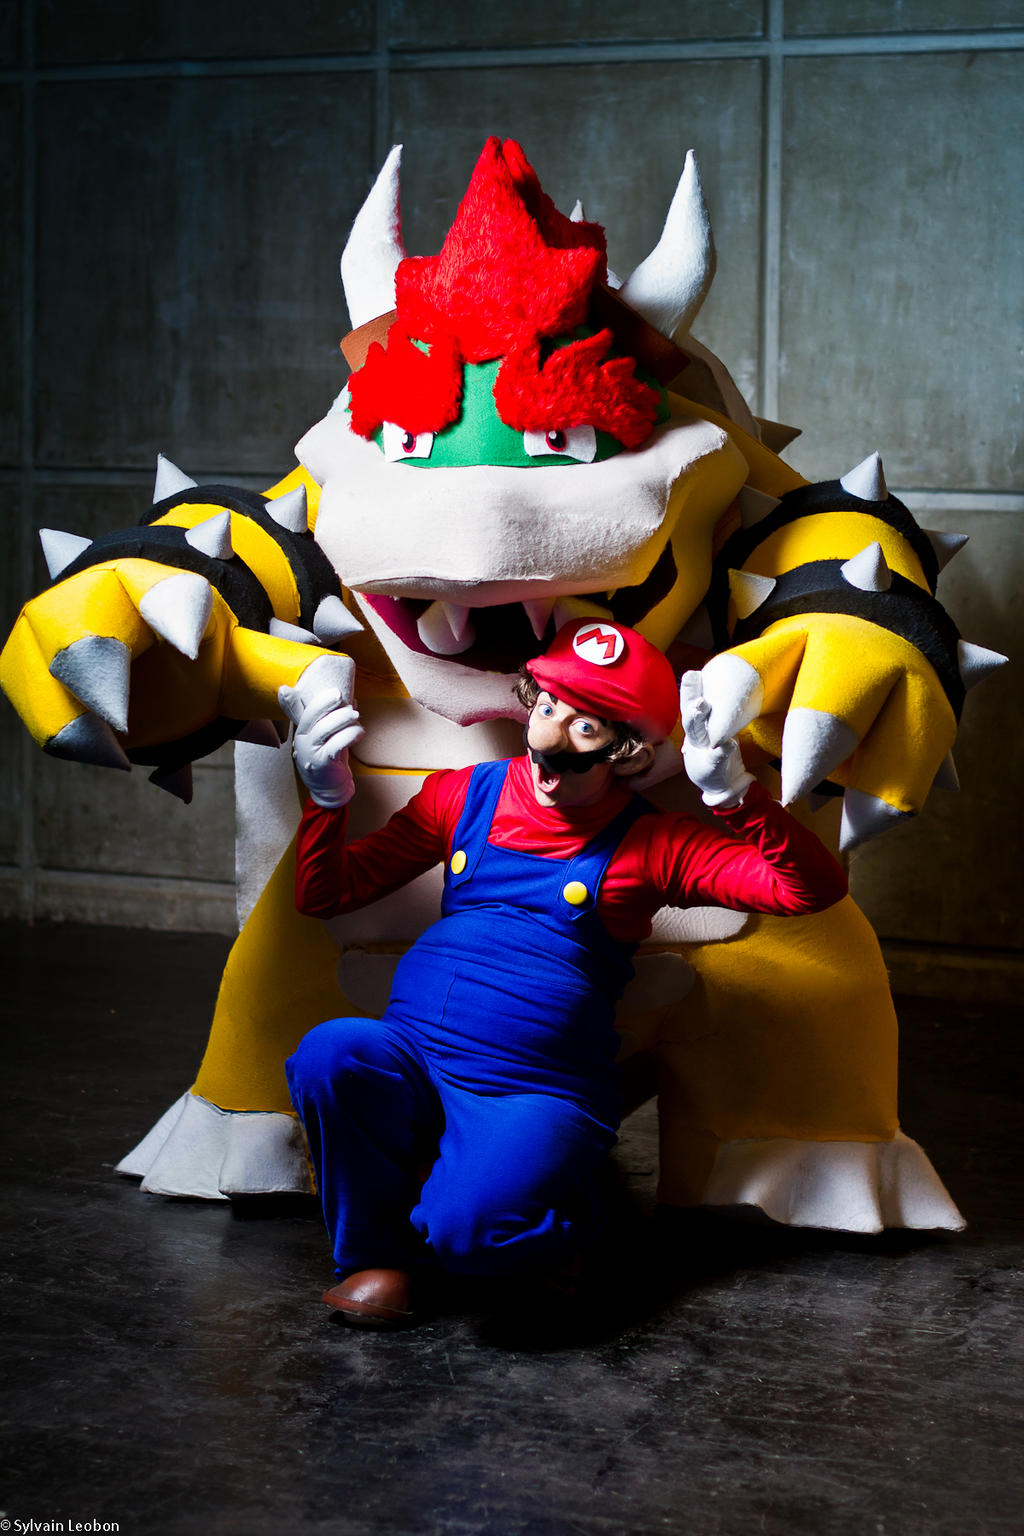 Super Mario Bros Bowser Cosplay by sikaycosplay on DeviantArt